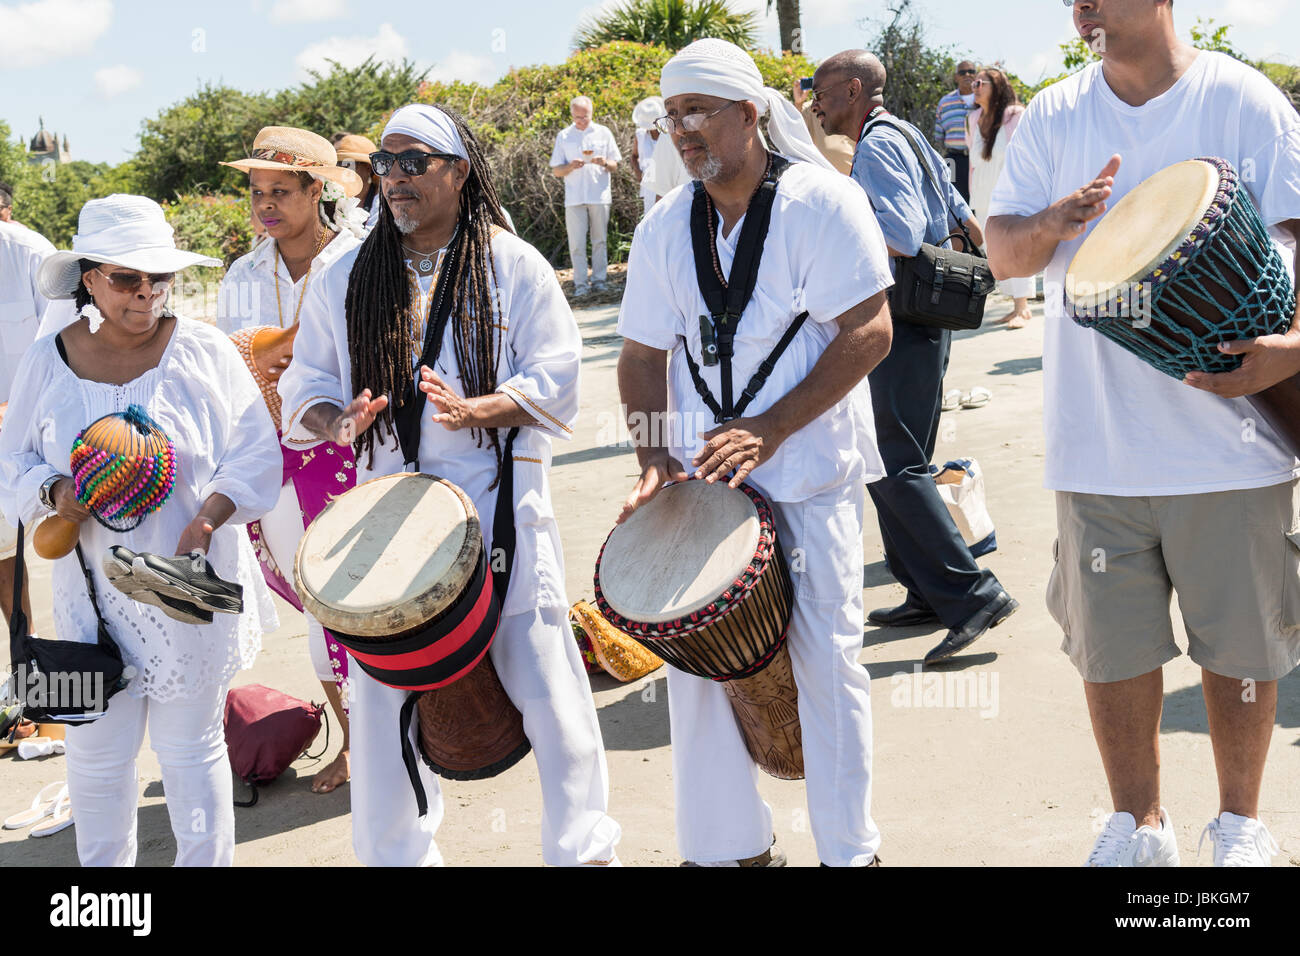 Descendants of enslaved Africans brought to Charleston in the Middle Passage hold a drum circle to honor their relatives lost during a remembrance ceremony at Fort Moultie National Monument June 10, 2017 in Sullivan's Island, South Carolina. The Middle Passage refers to the triangular trade in which millions of Africans were shipped to the New World as part of the Atlantic slave trade. An estimated 15% of the Africans died at sea and considerably more in the process of capturing and transporting. The total number of African deaths directly attributable to the Middle Passage voyage is estimated Stock Photo